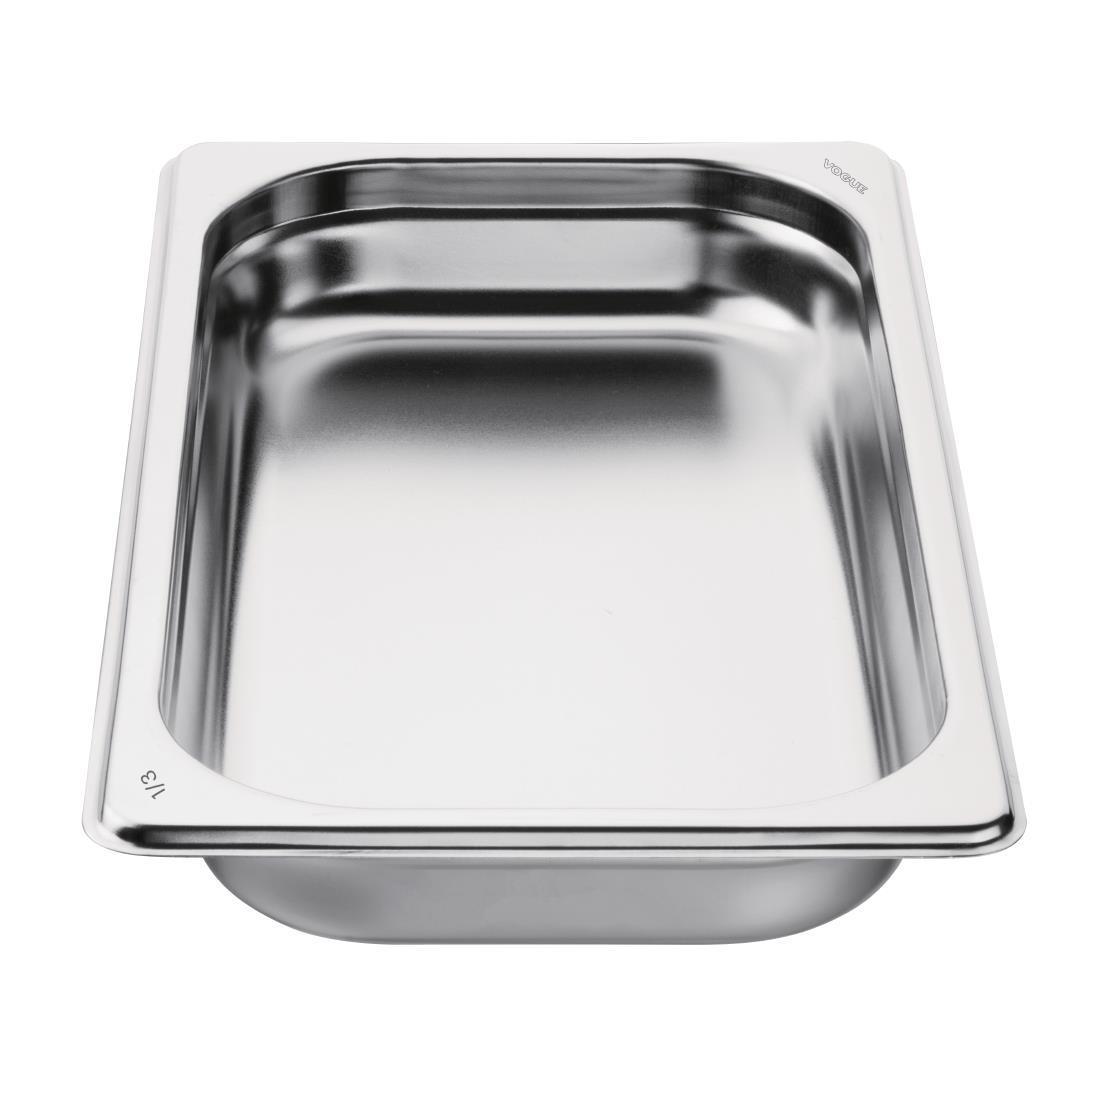 Vogue Stainless Steel 1/3 Gastronorm Pan 40mm - GM311  - 5